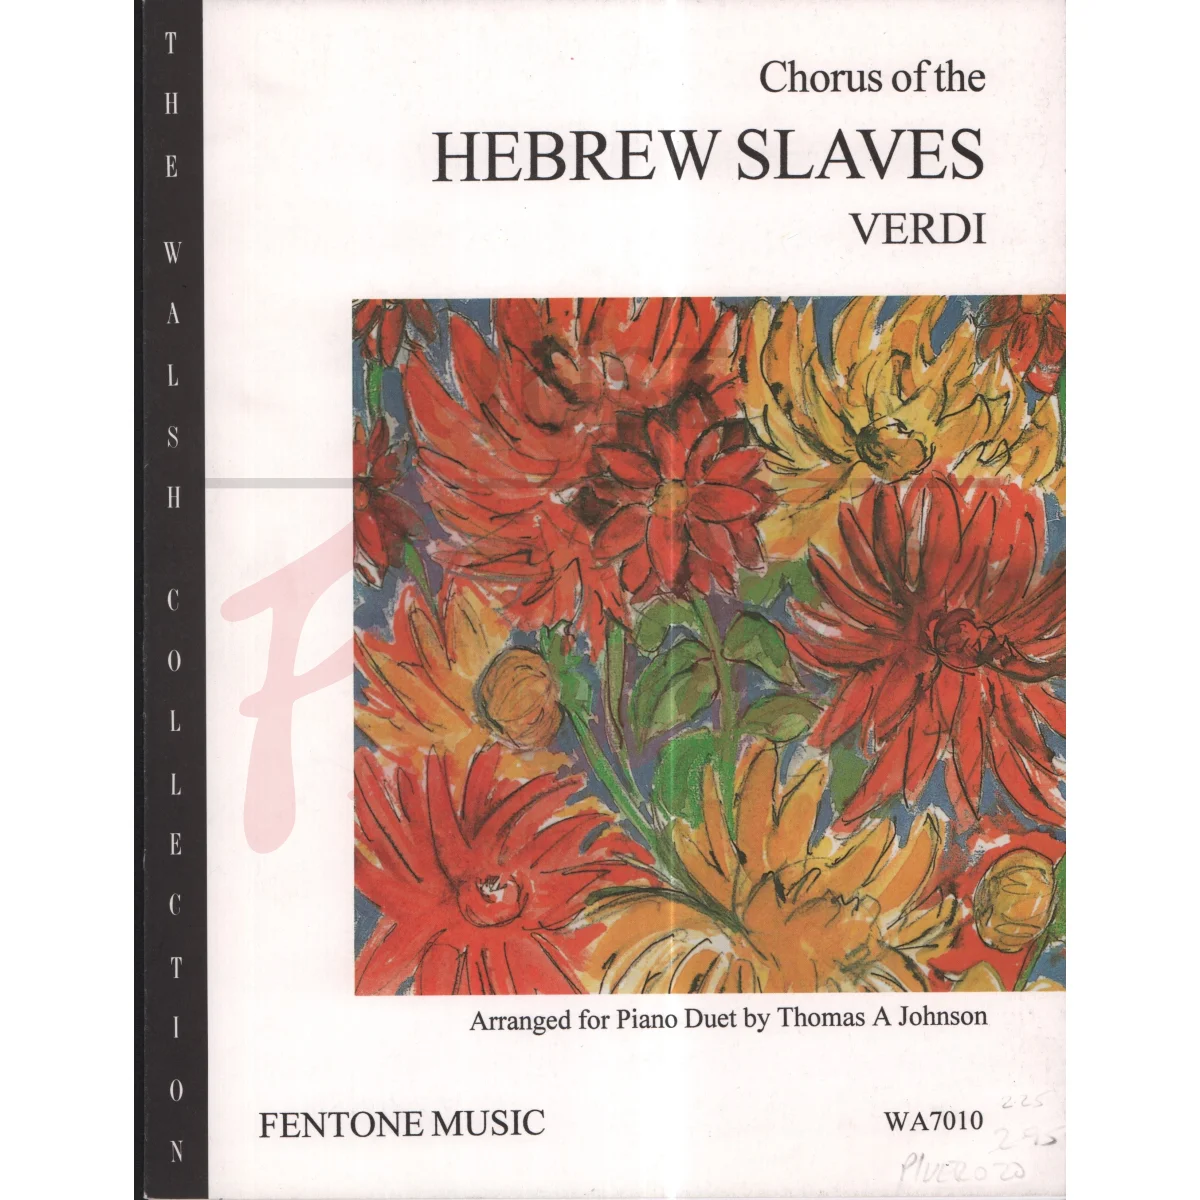 Chorus of the Hebrew Slaves for Piano Duet